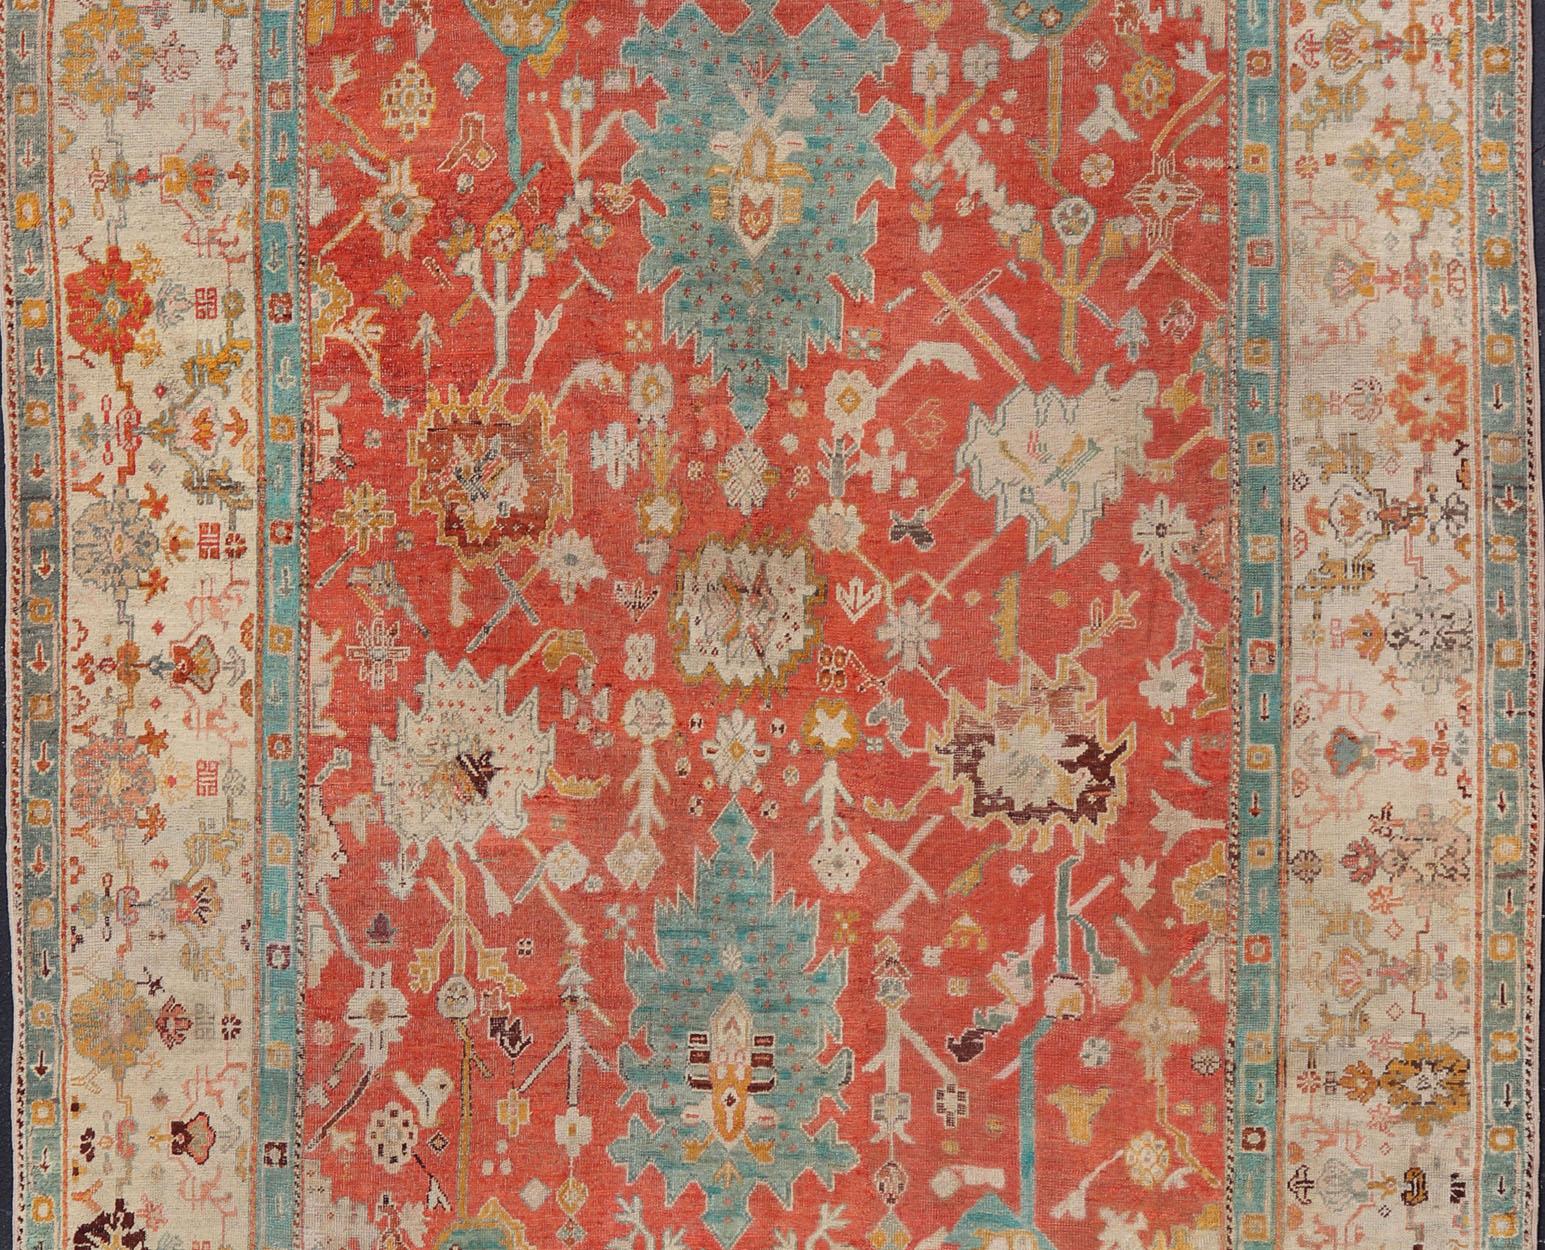 Antique Turkish Oushak In Tribal Motifs in Soft Coral, Blue, Marigold, and Cream For Sale 5